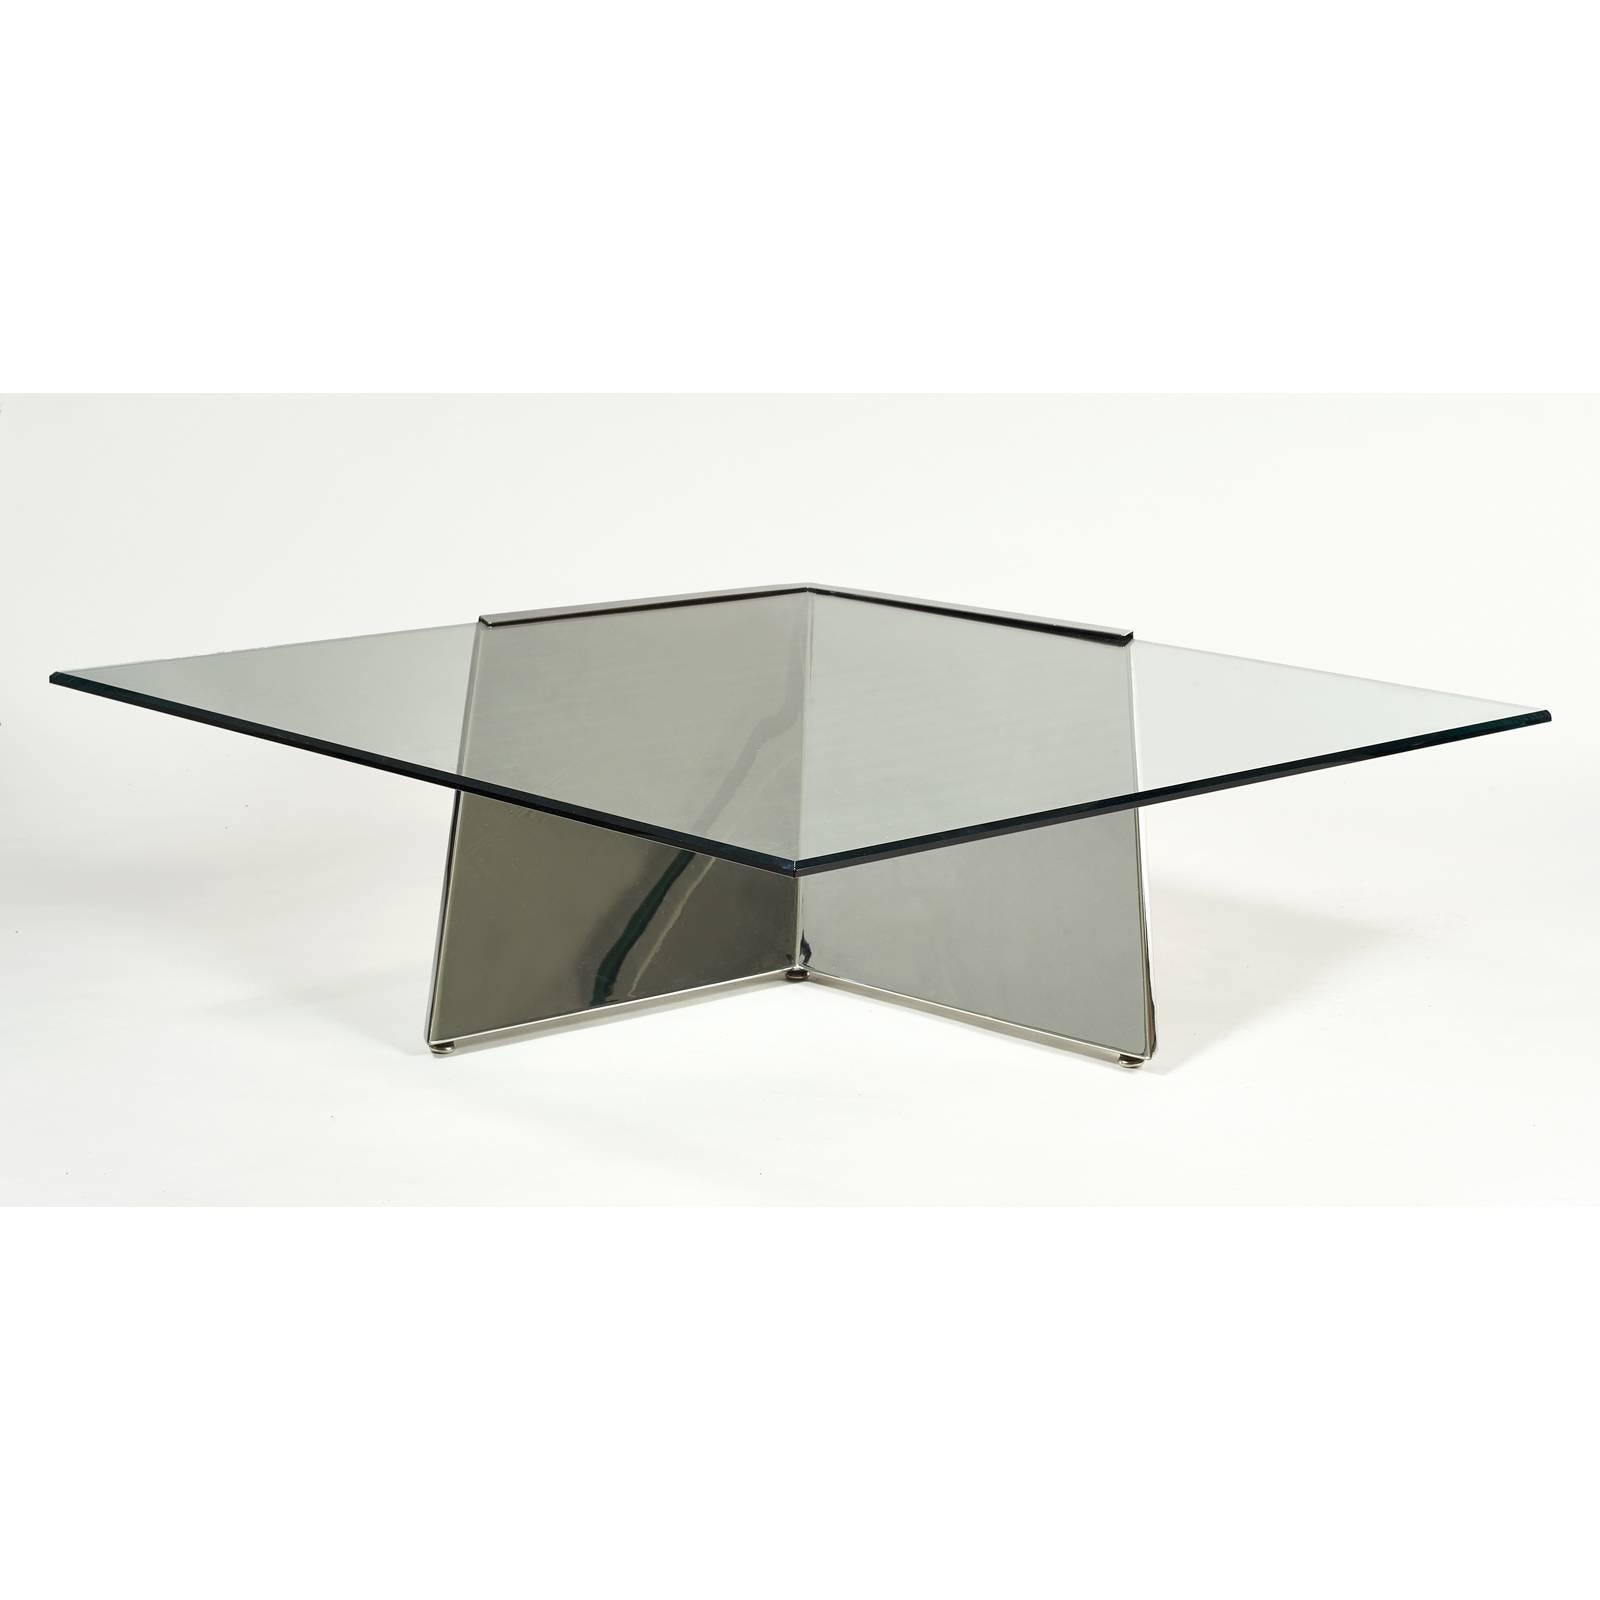 You are viewing a very unique cantilever coffee table by Brueton. (We have one more in another listing). First of all, its a real eyecatcher when someone walks into a living room. It seems to defy gravity. The piece is very heavy and substantial.